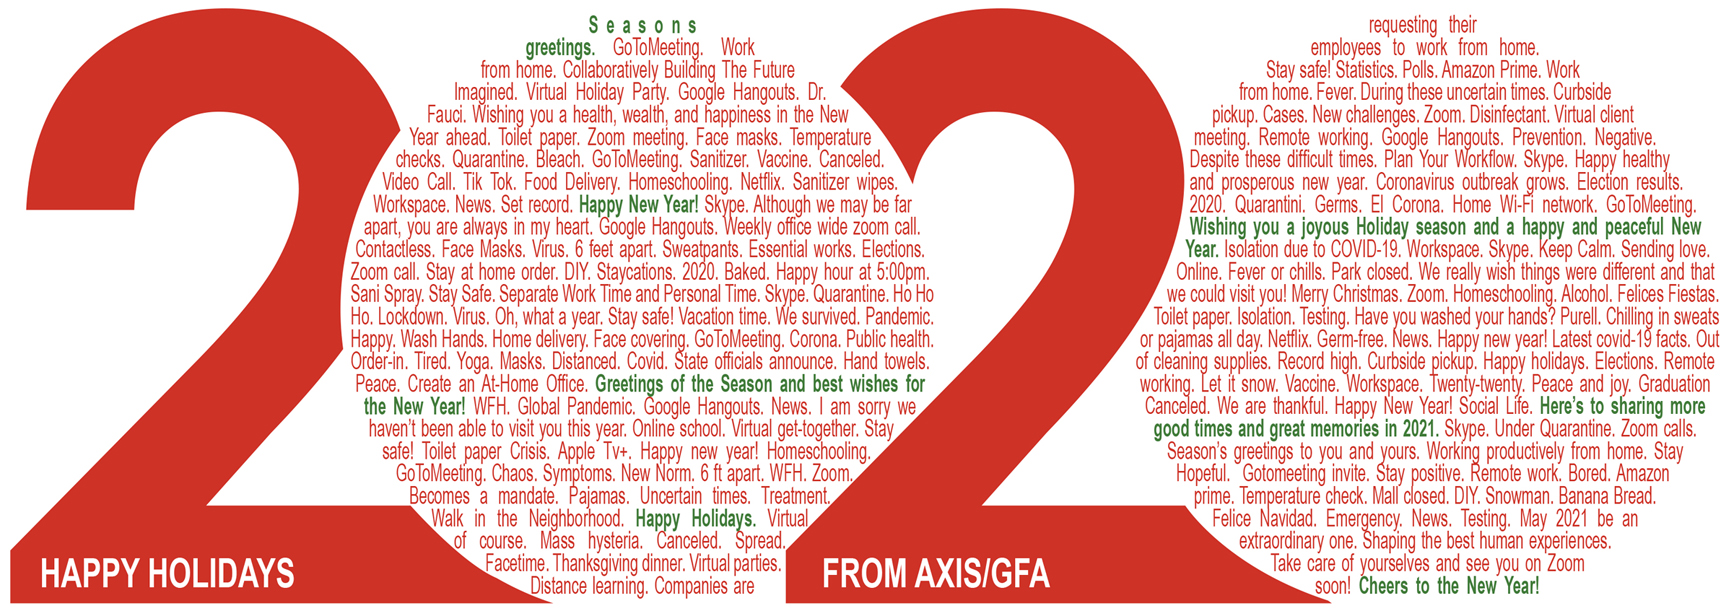 The 2020 AXIS/GFA holiday card, designed by Avani Sheth in our Los Angeles architect studio